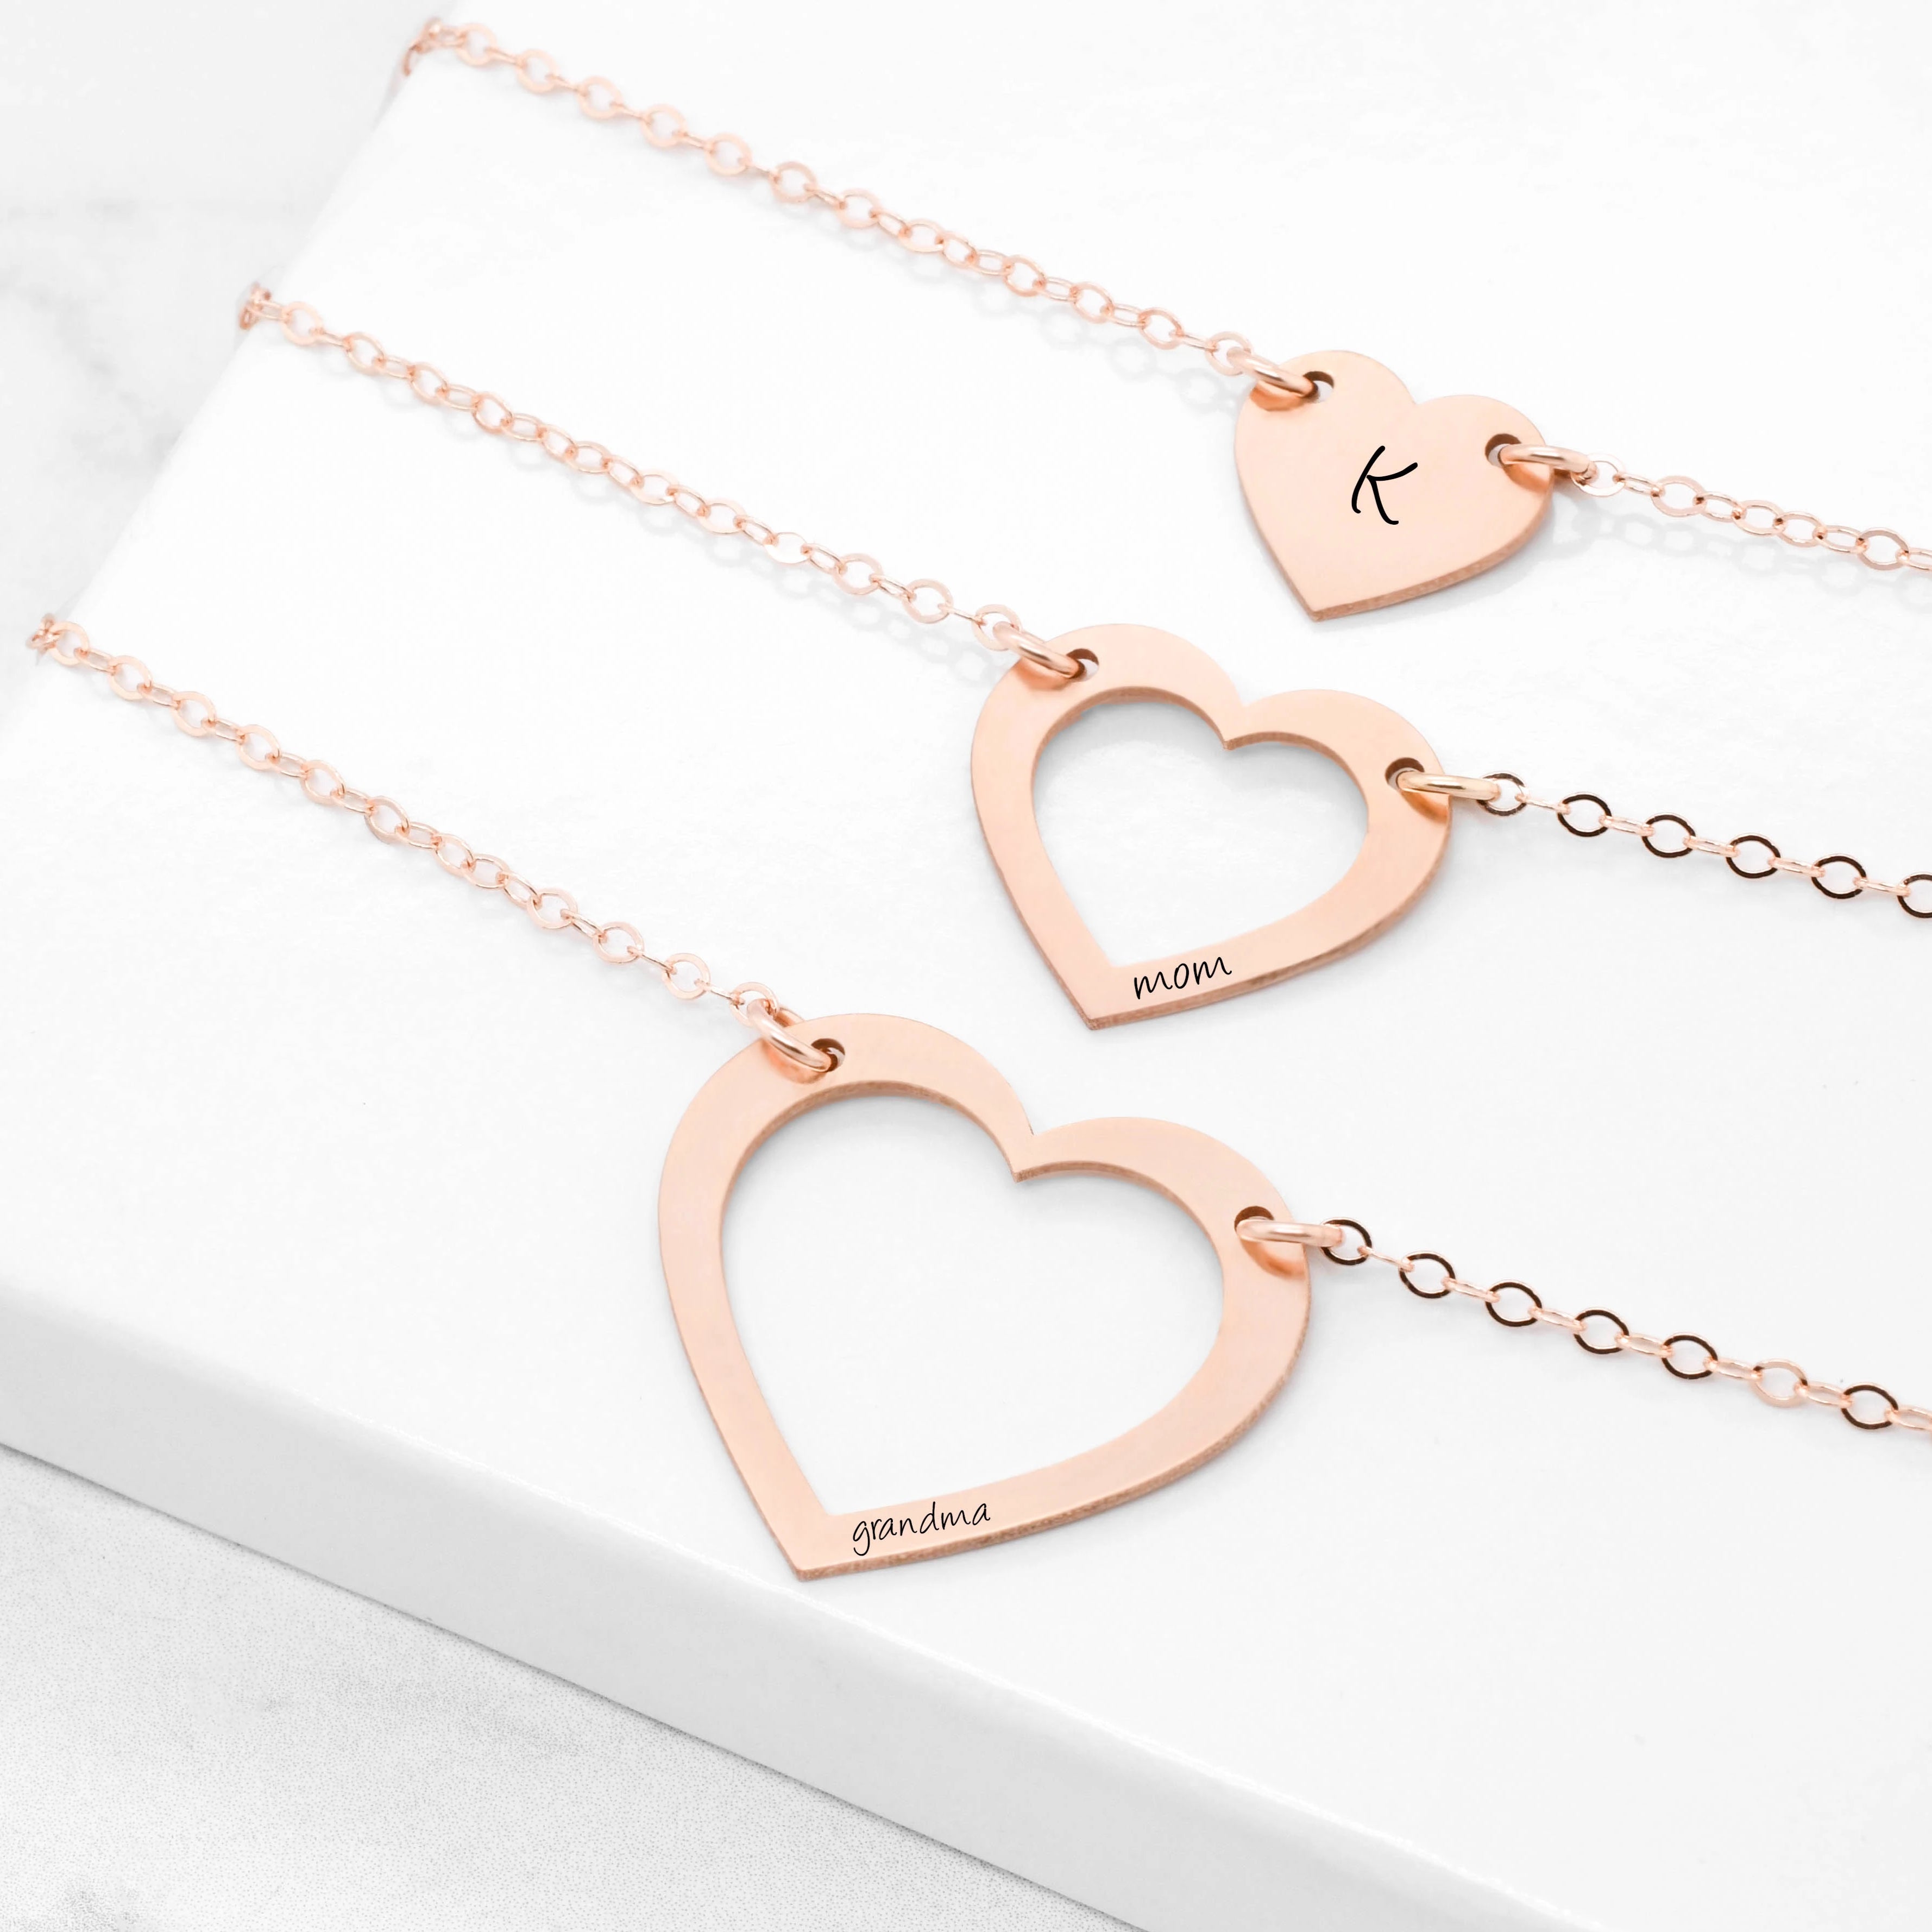 Three Generations of Love • Sterling Silver Heart Keepsake Necklace •  Grandmother, Mother, Daughter/Son Jewelry • Gift for Mom Grandma Grandchild